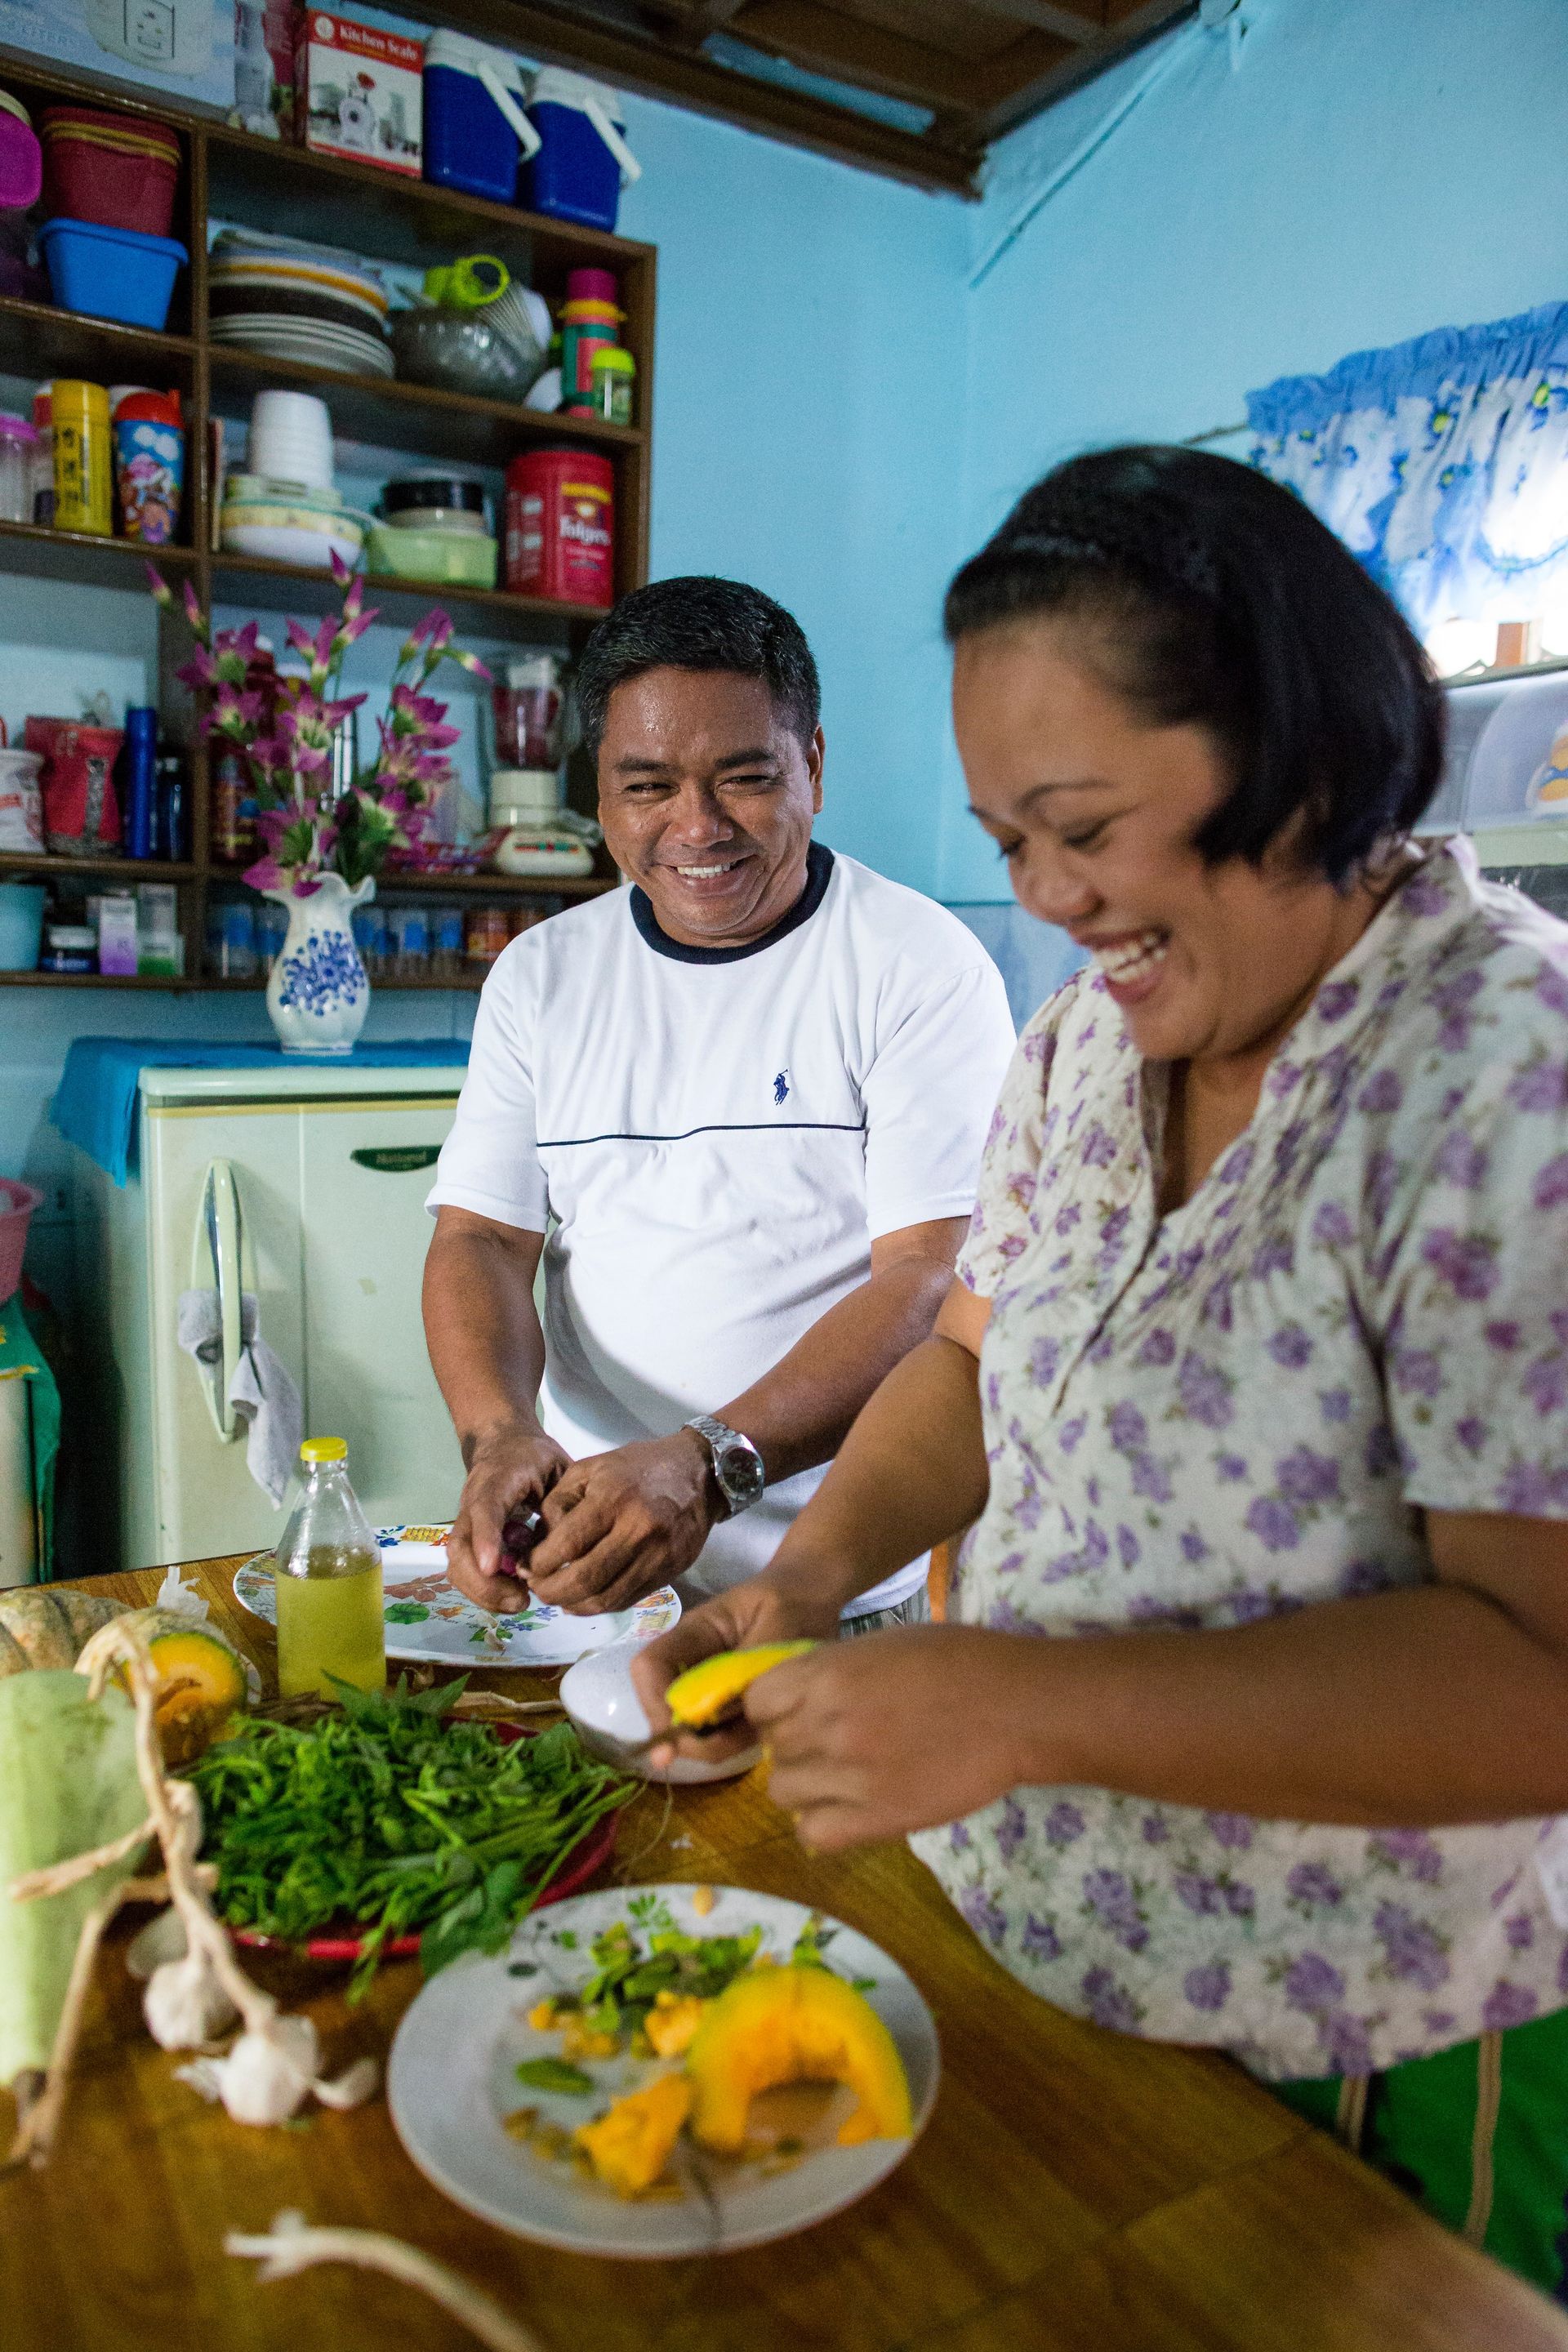 A couple from the Philippines standing in a kitchen and preparing food together.  